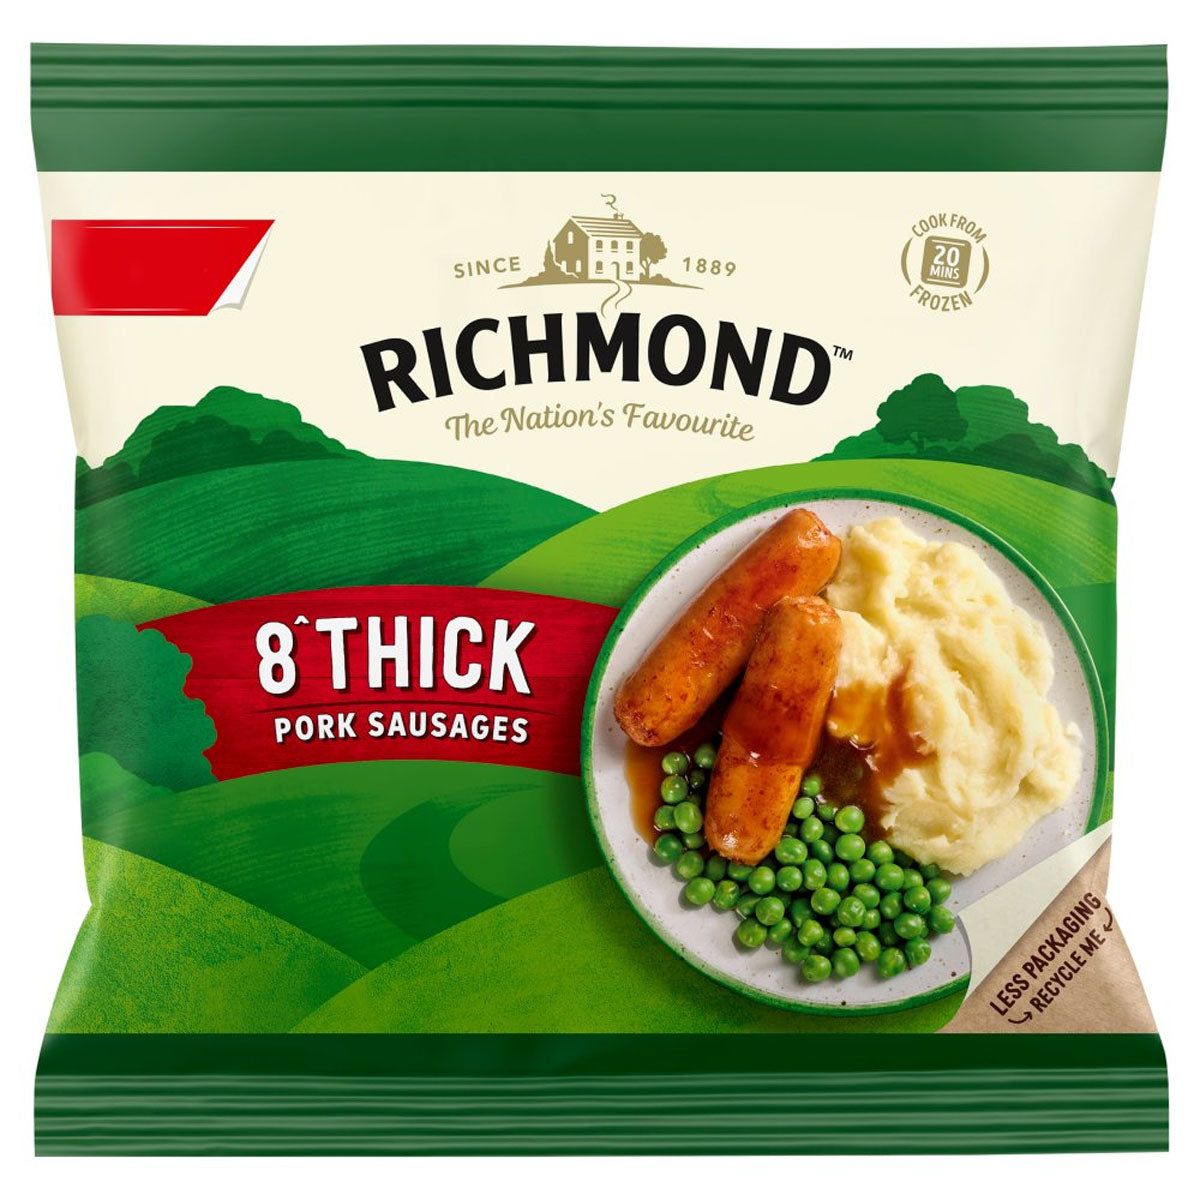 Richmond - 8 Thick Pork Sausages - 344g sausages with mashed potatoes.